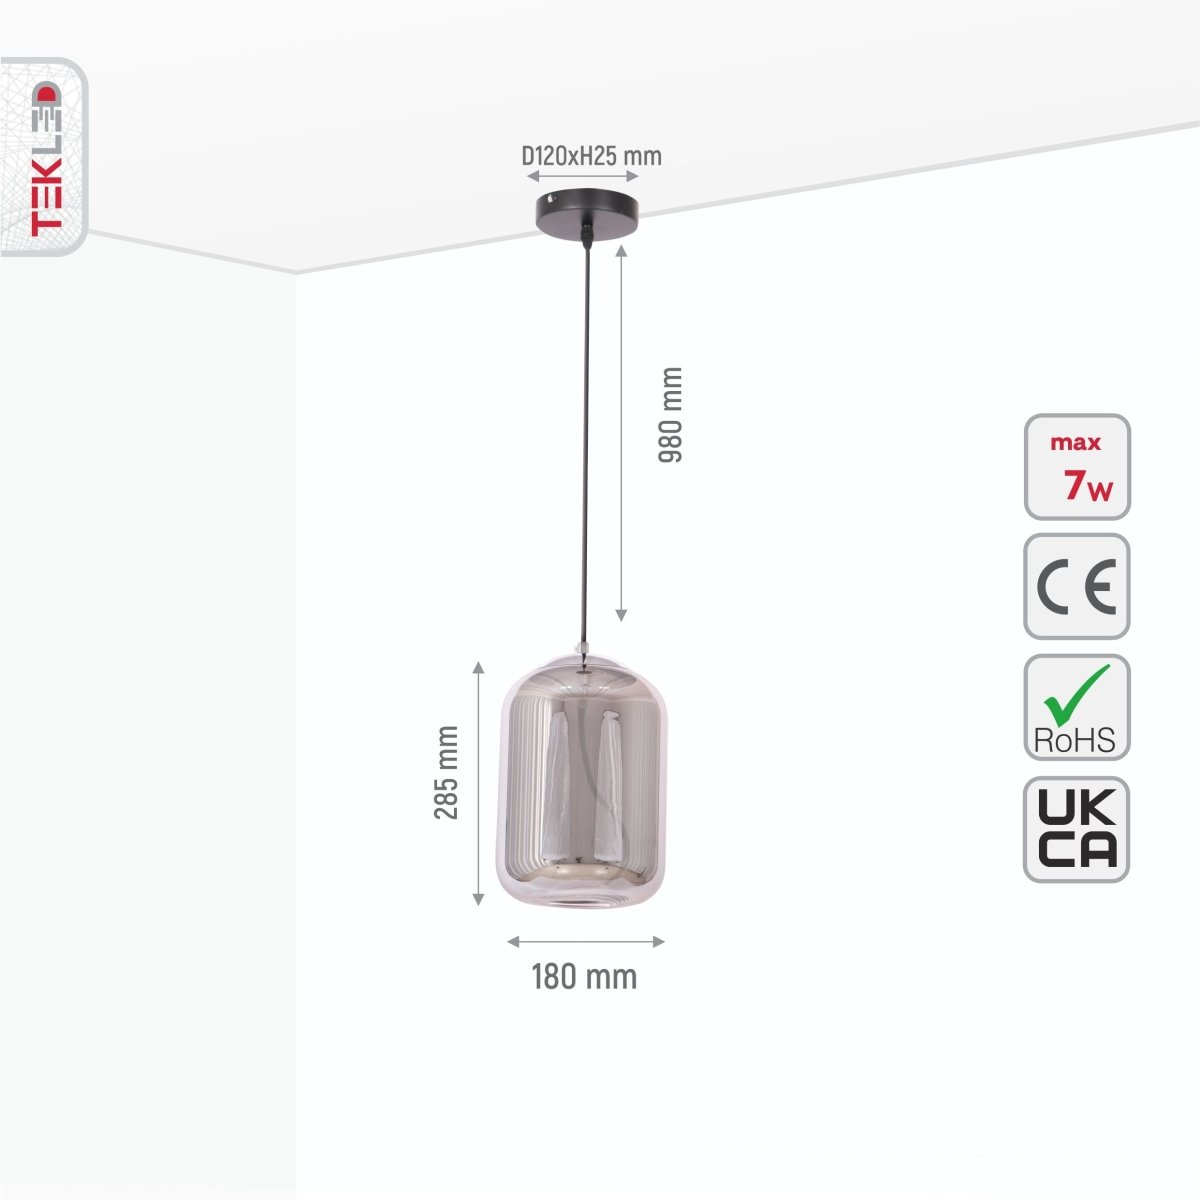 Size and specs of Smoky Glass Cylinder Pendant Light with G9 Fitting | TEKLED 159-17332